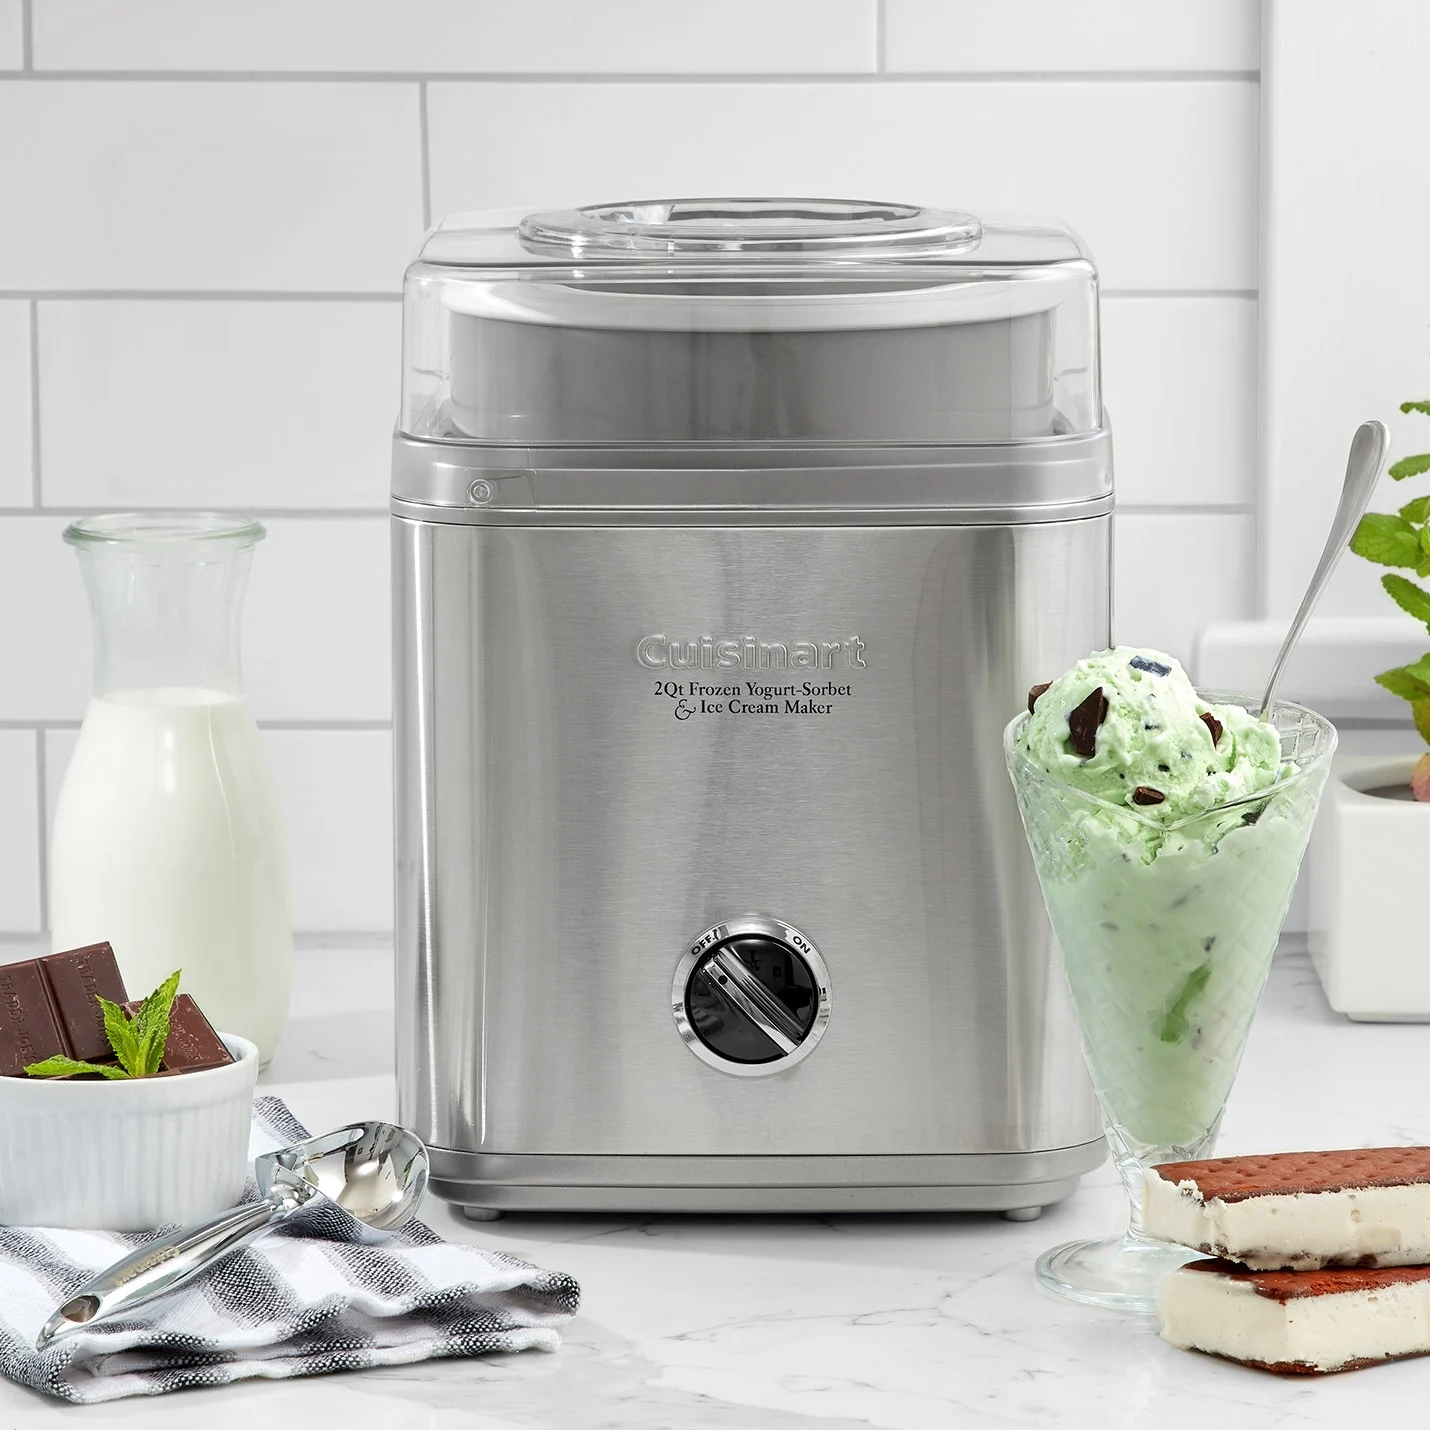 How To Use Cuisinart 2Qt Ice Cream Maker